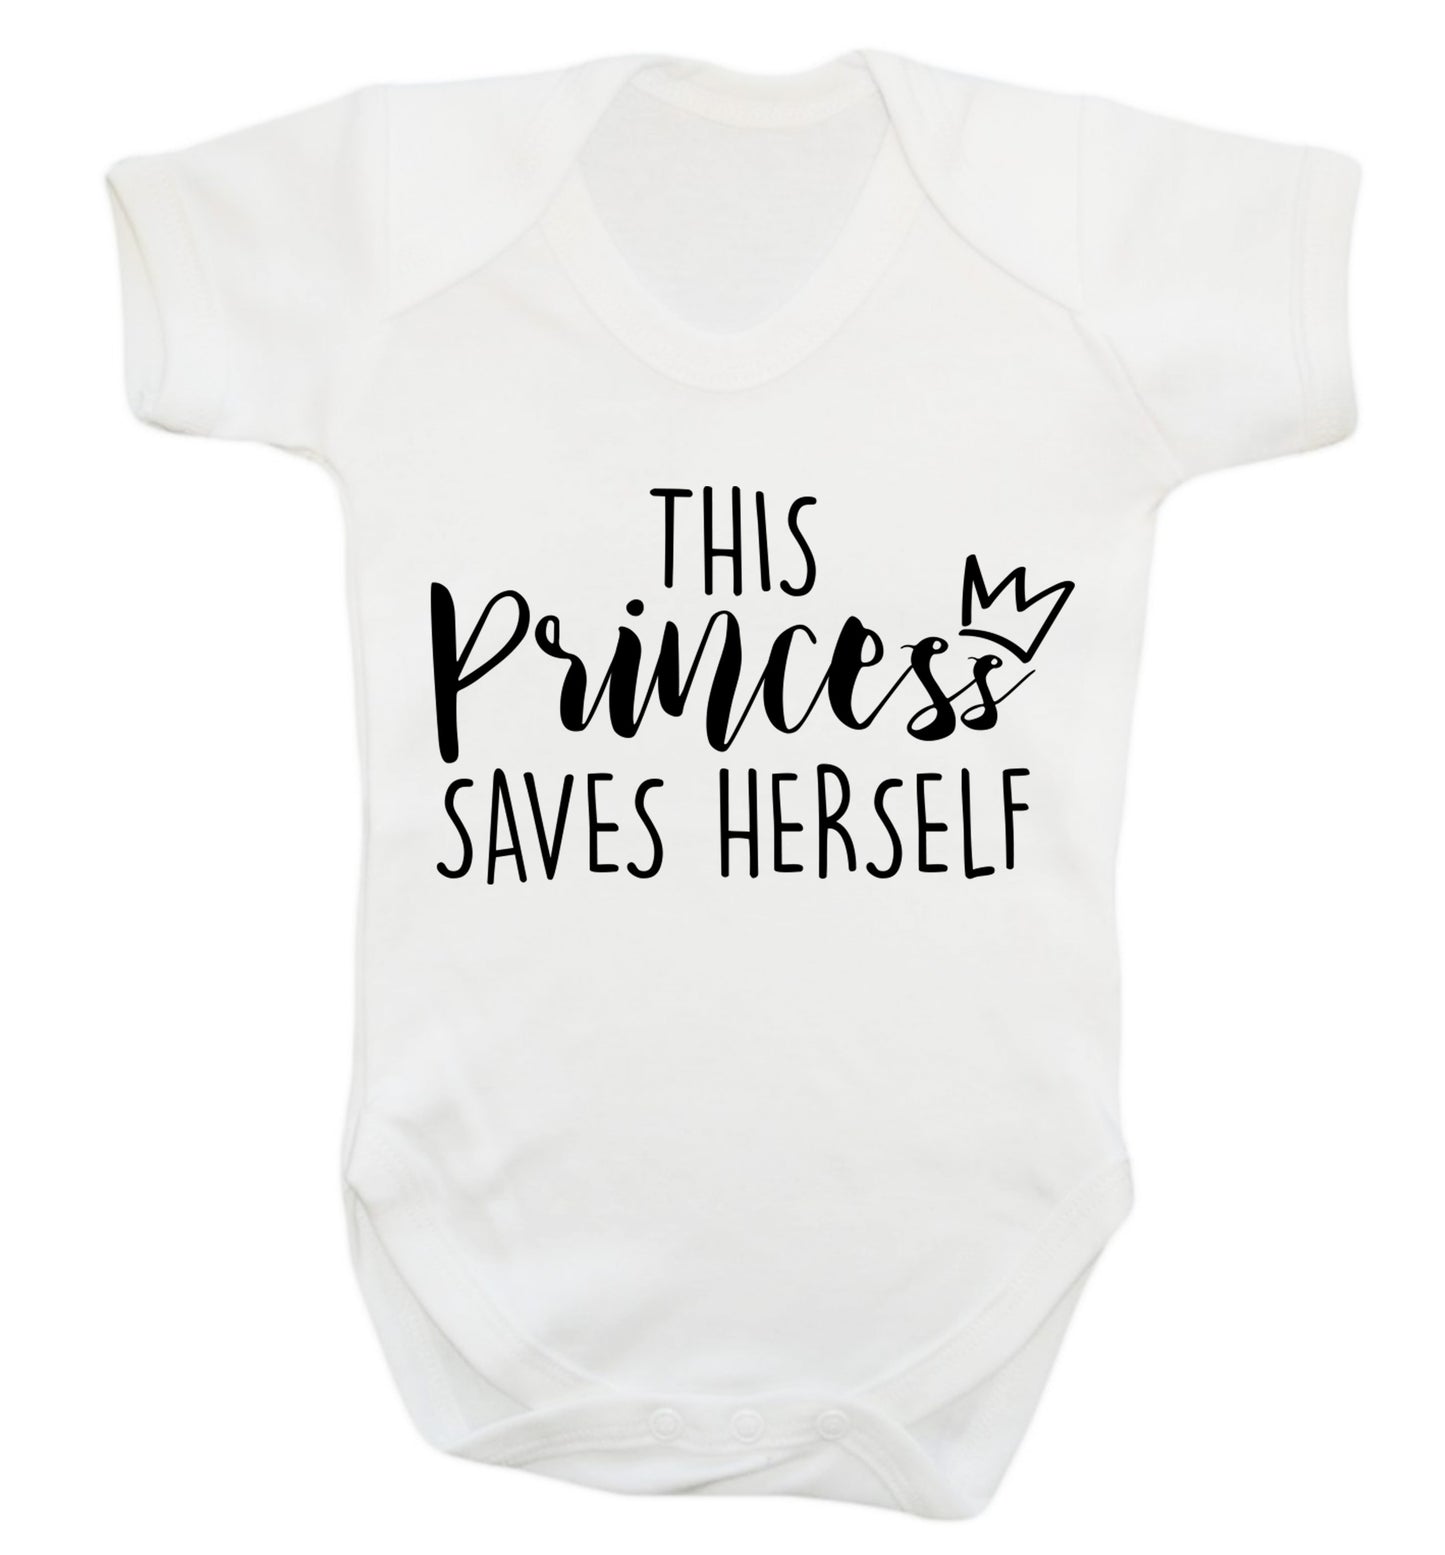 This princess saves herself Baby Vest white 18-24 months